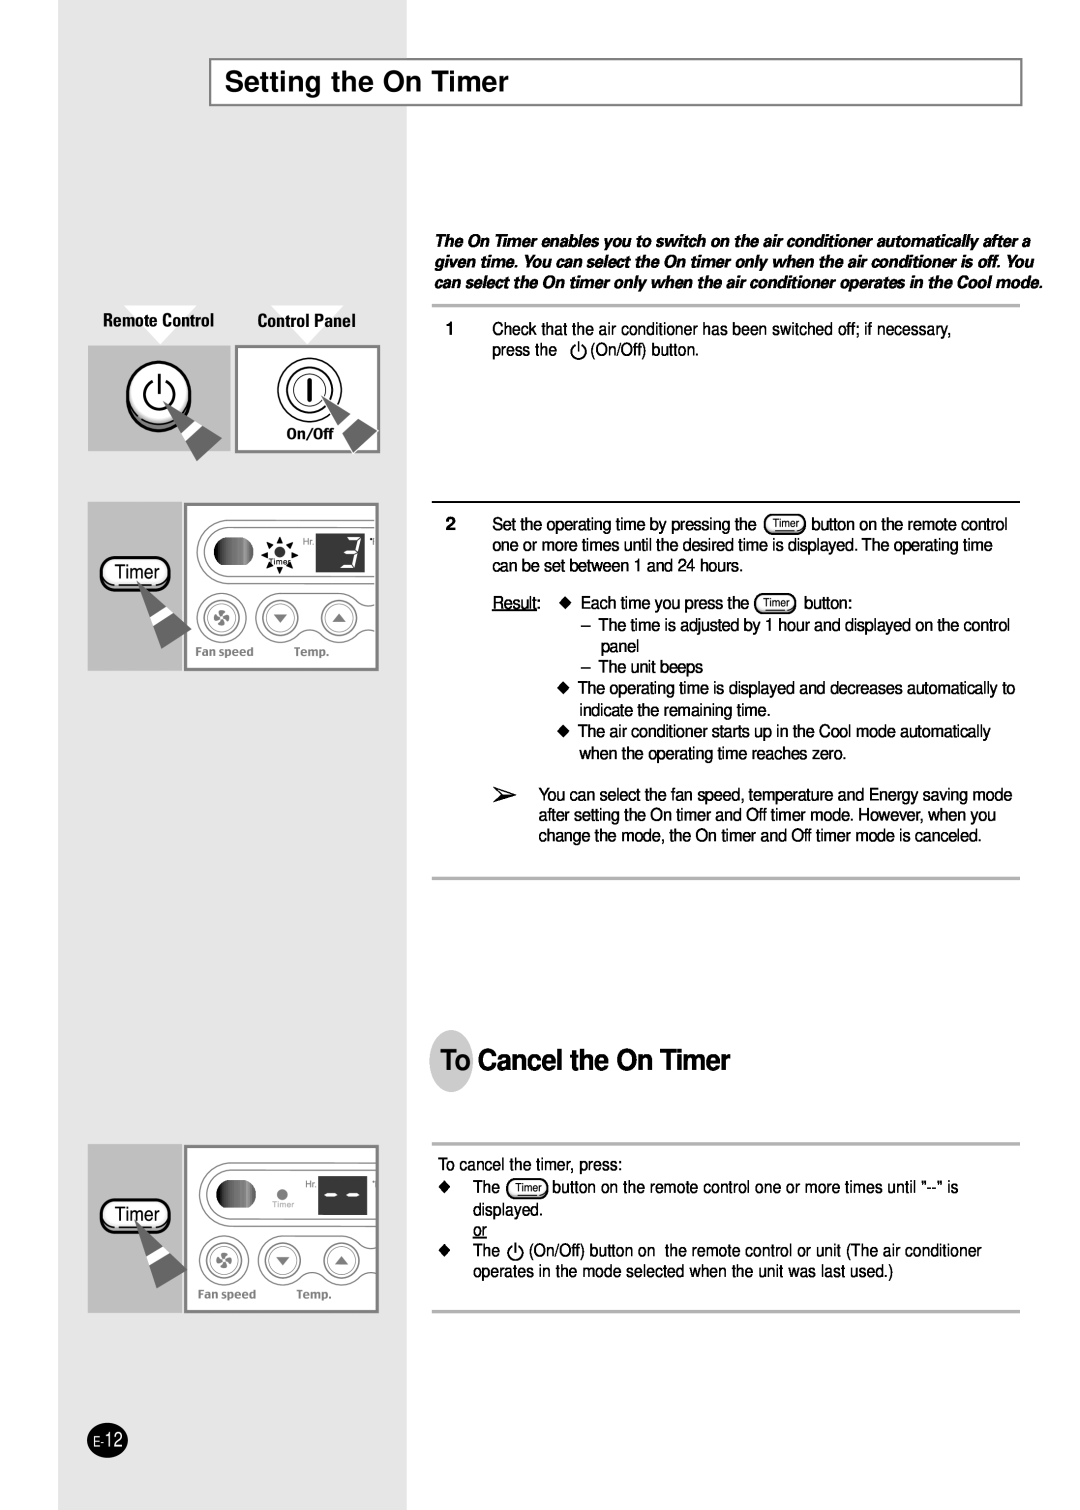 Samsung AW1201B, AW1801B, AW1001B, AW0801B manual Setting the On Timer, To Cancel the On Timer, Remote Control, Control Panel 